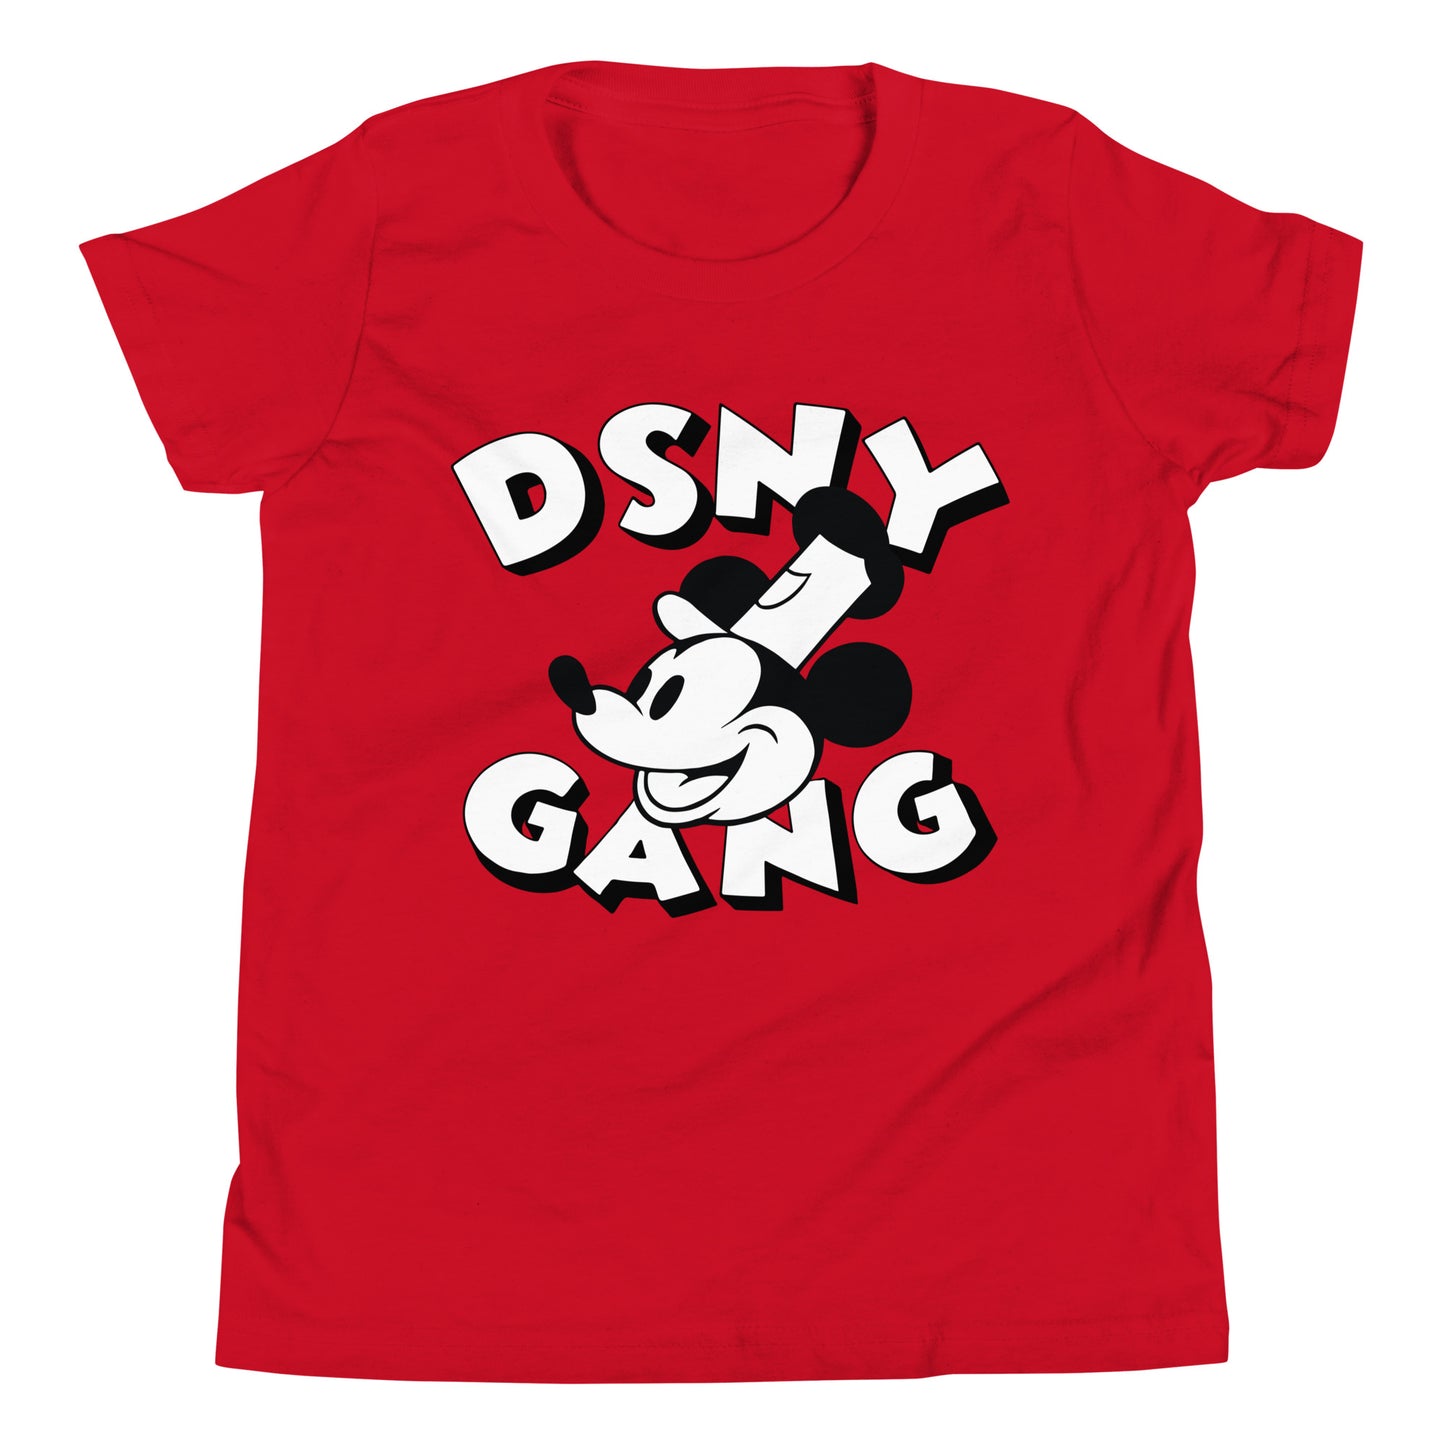 DSNY GANG Steamboat Willie Youth Tee